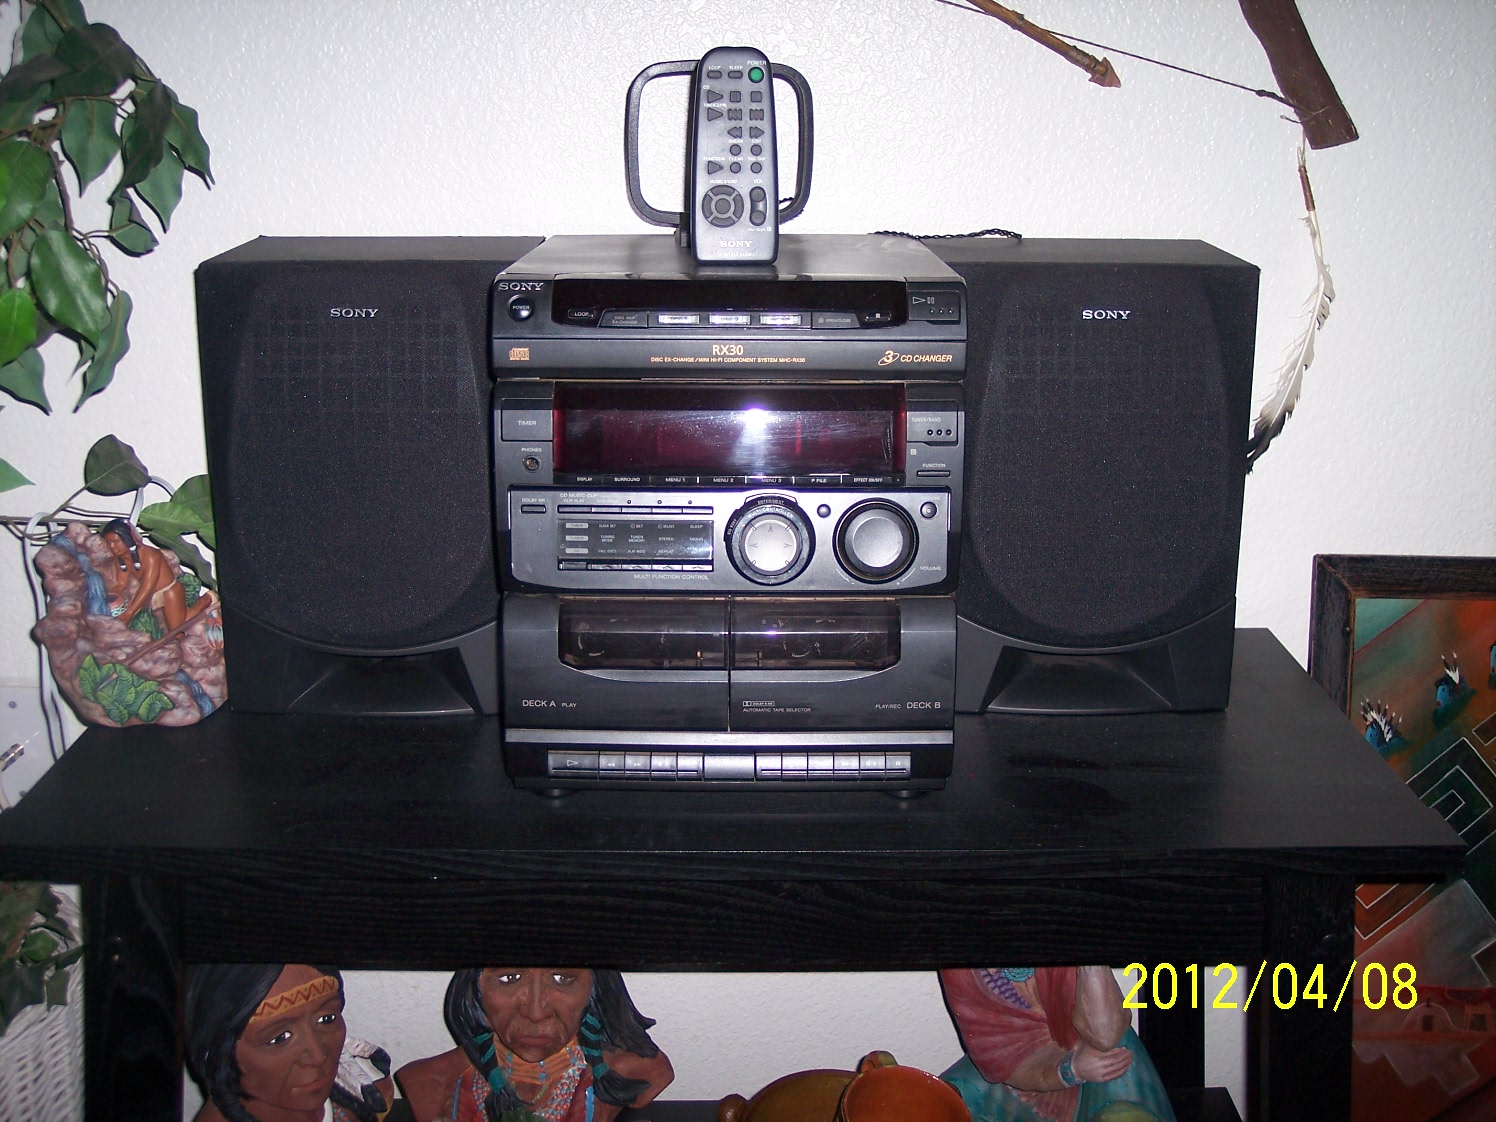 Sony stereo/ 3-cd / cassette player with speakers and remote